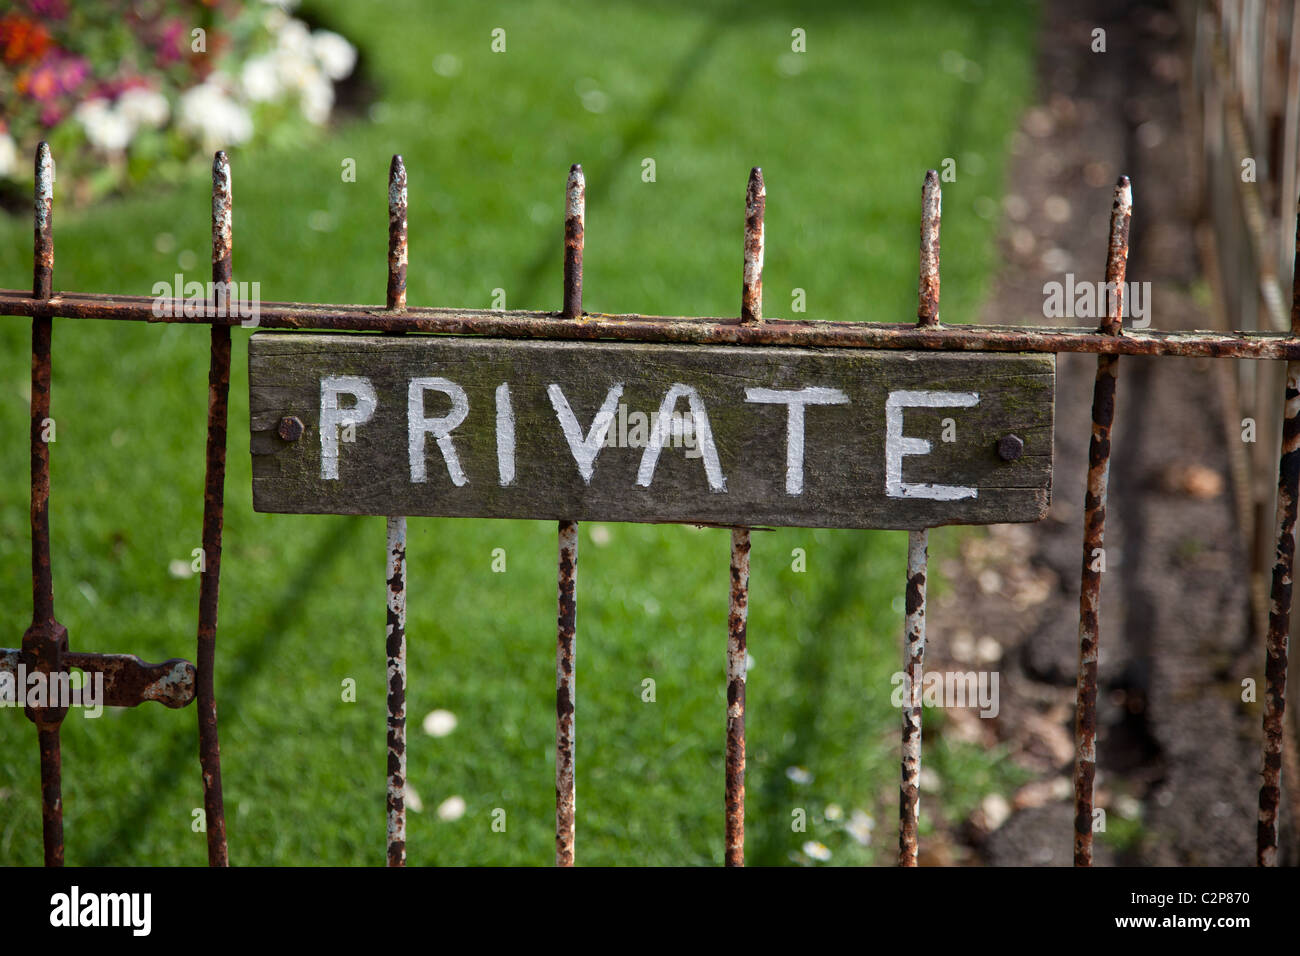 Private Sign On Old Rusty Garden Gate Stock Photo Alamy